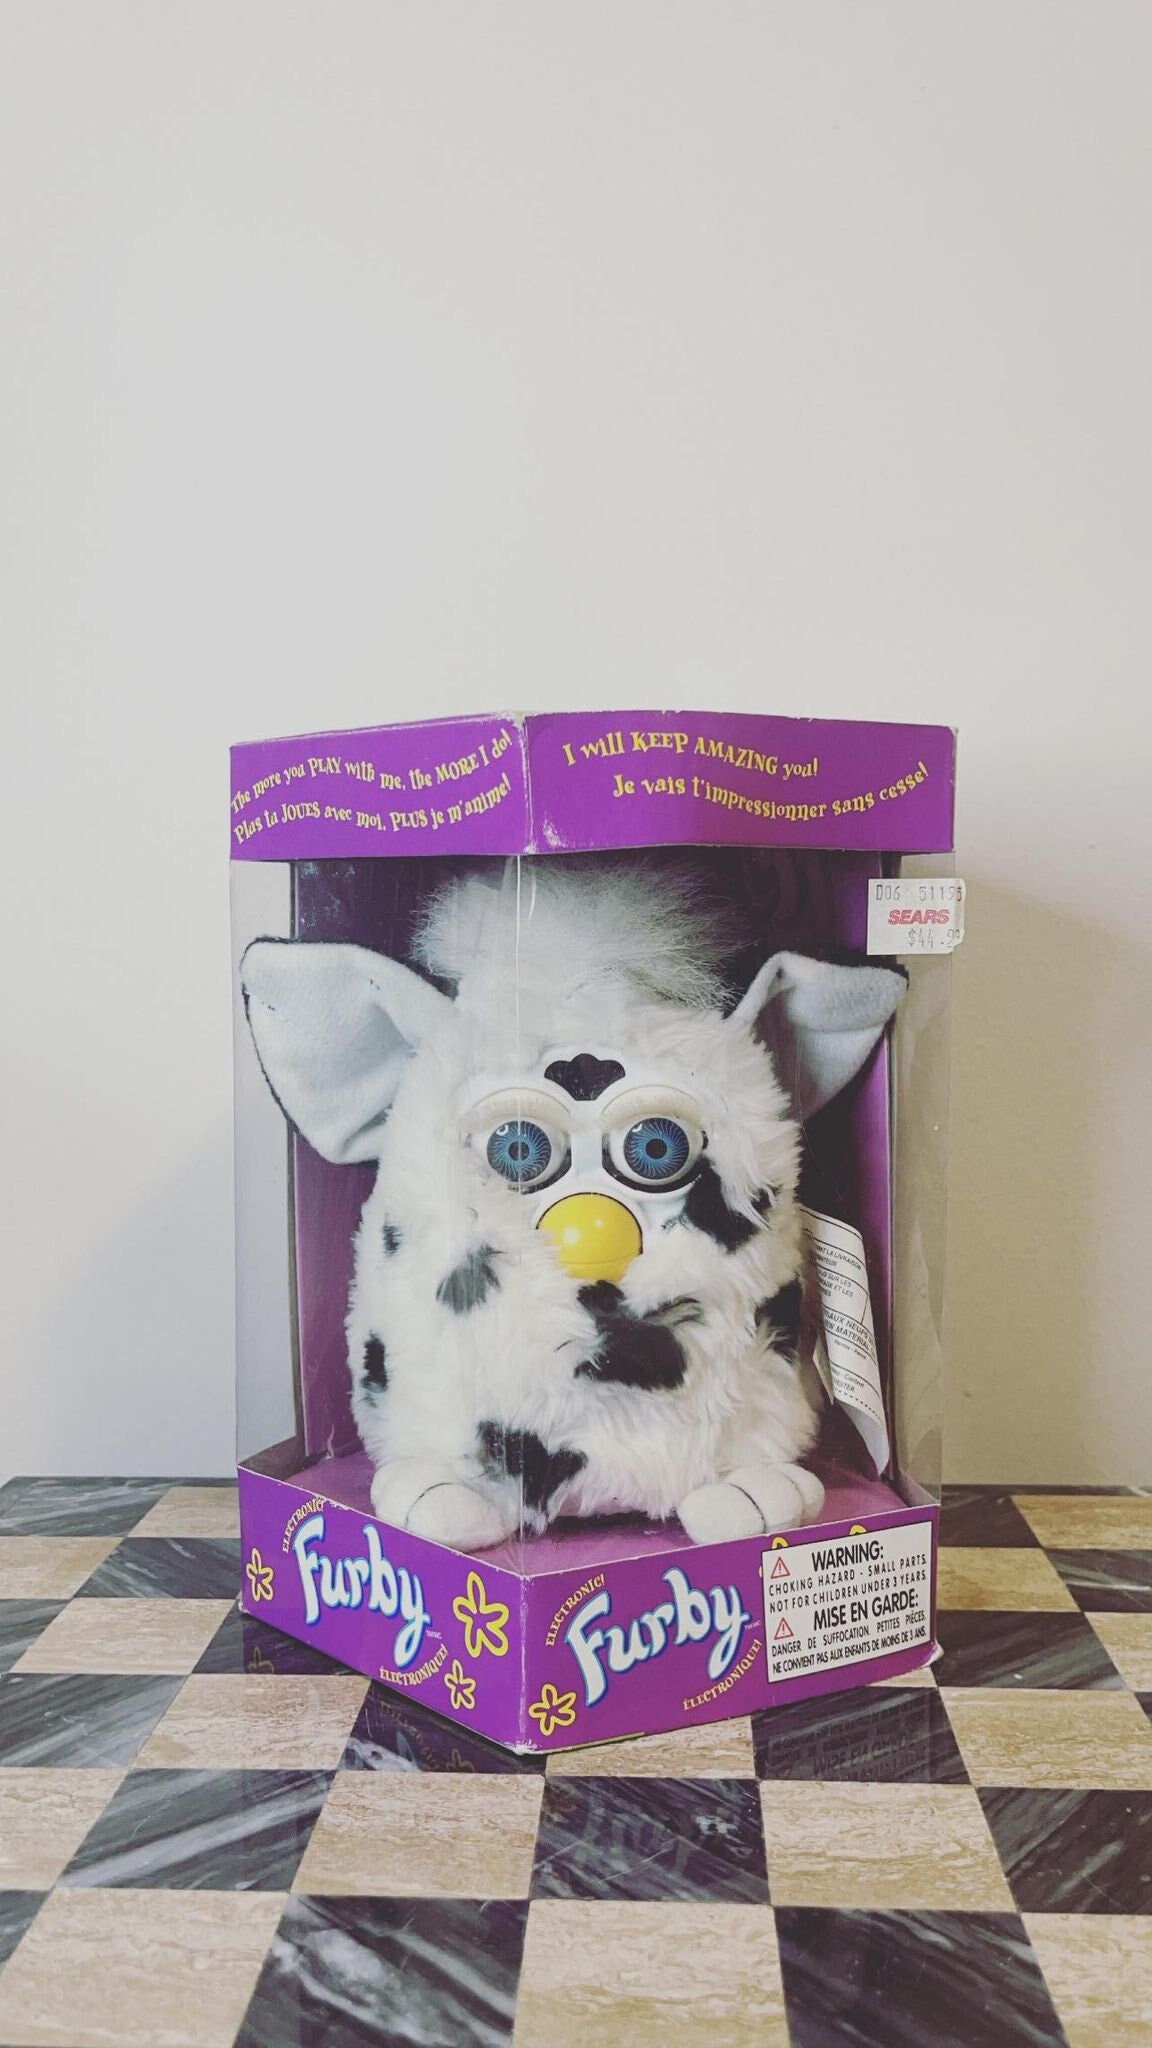 Furby 1998 Dalmatian Furby Plush Toy White and Black Spots Grey Eyes  Vintage Toy BOXED and RARE 